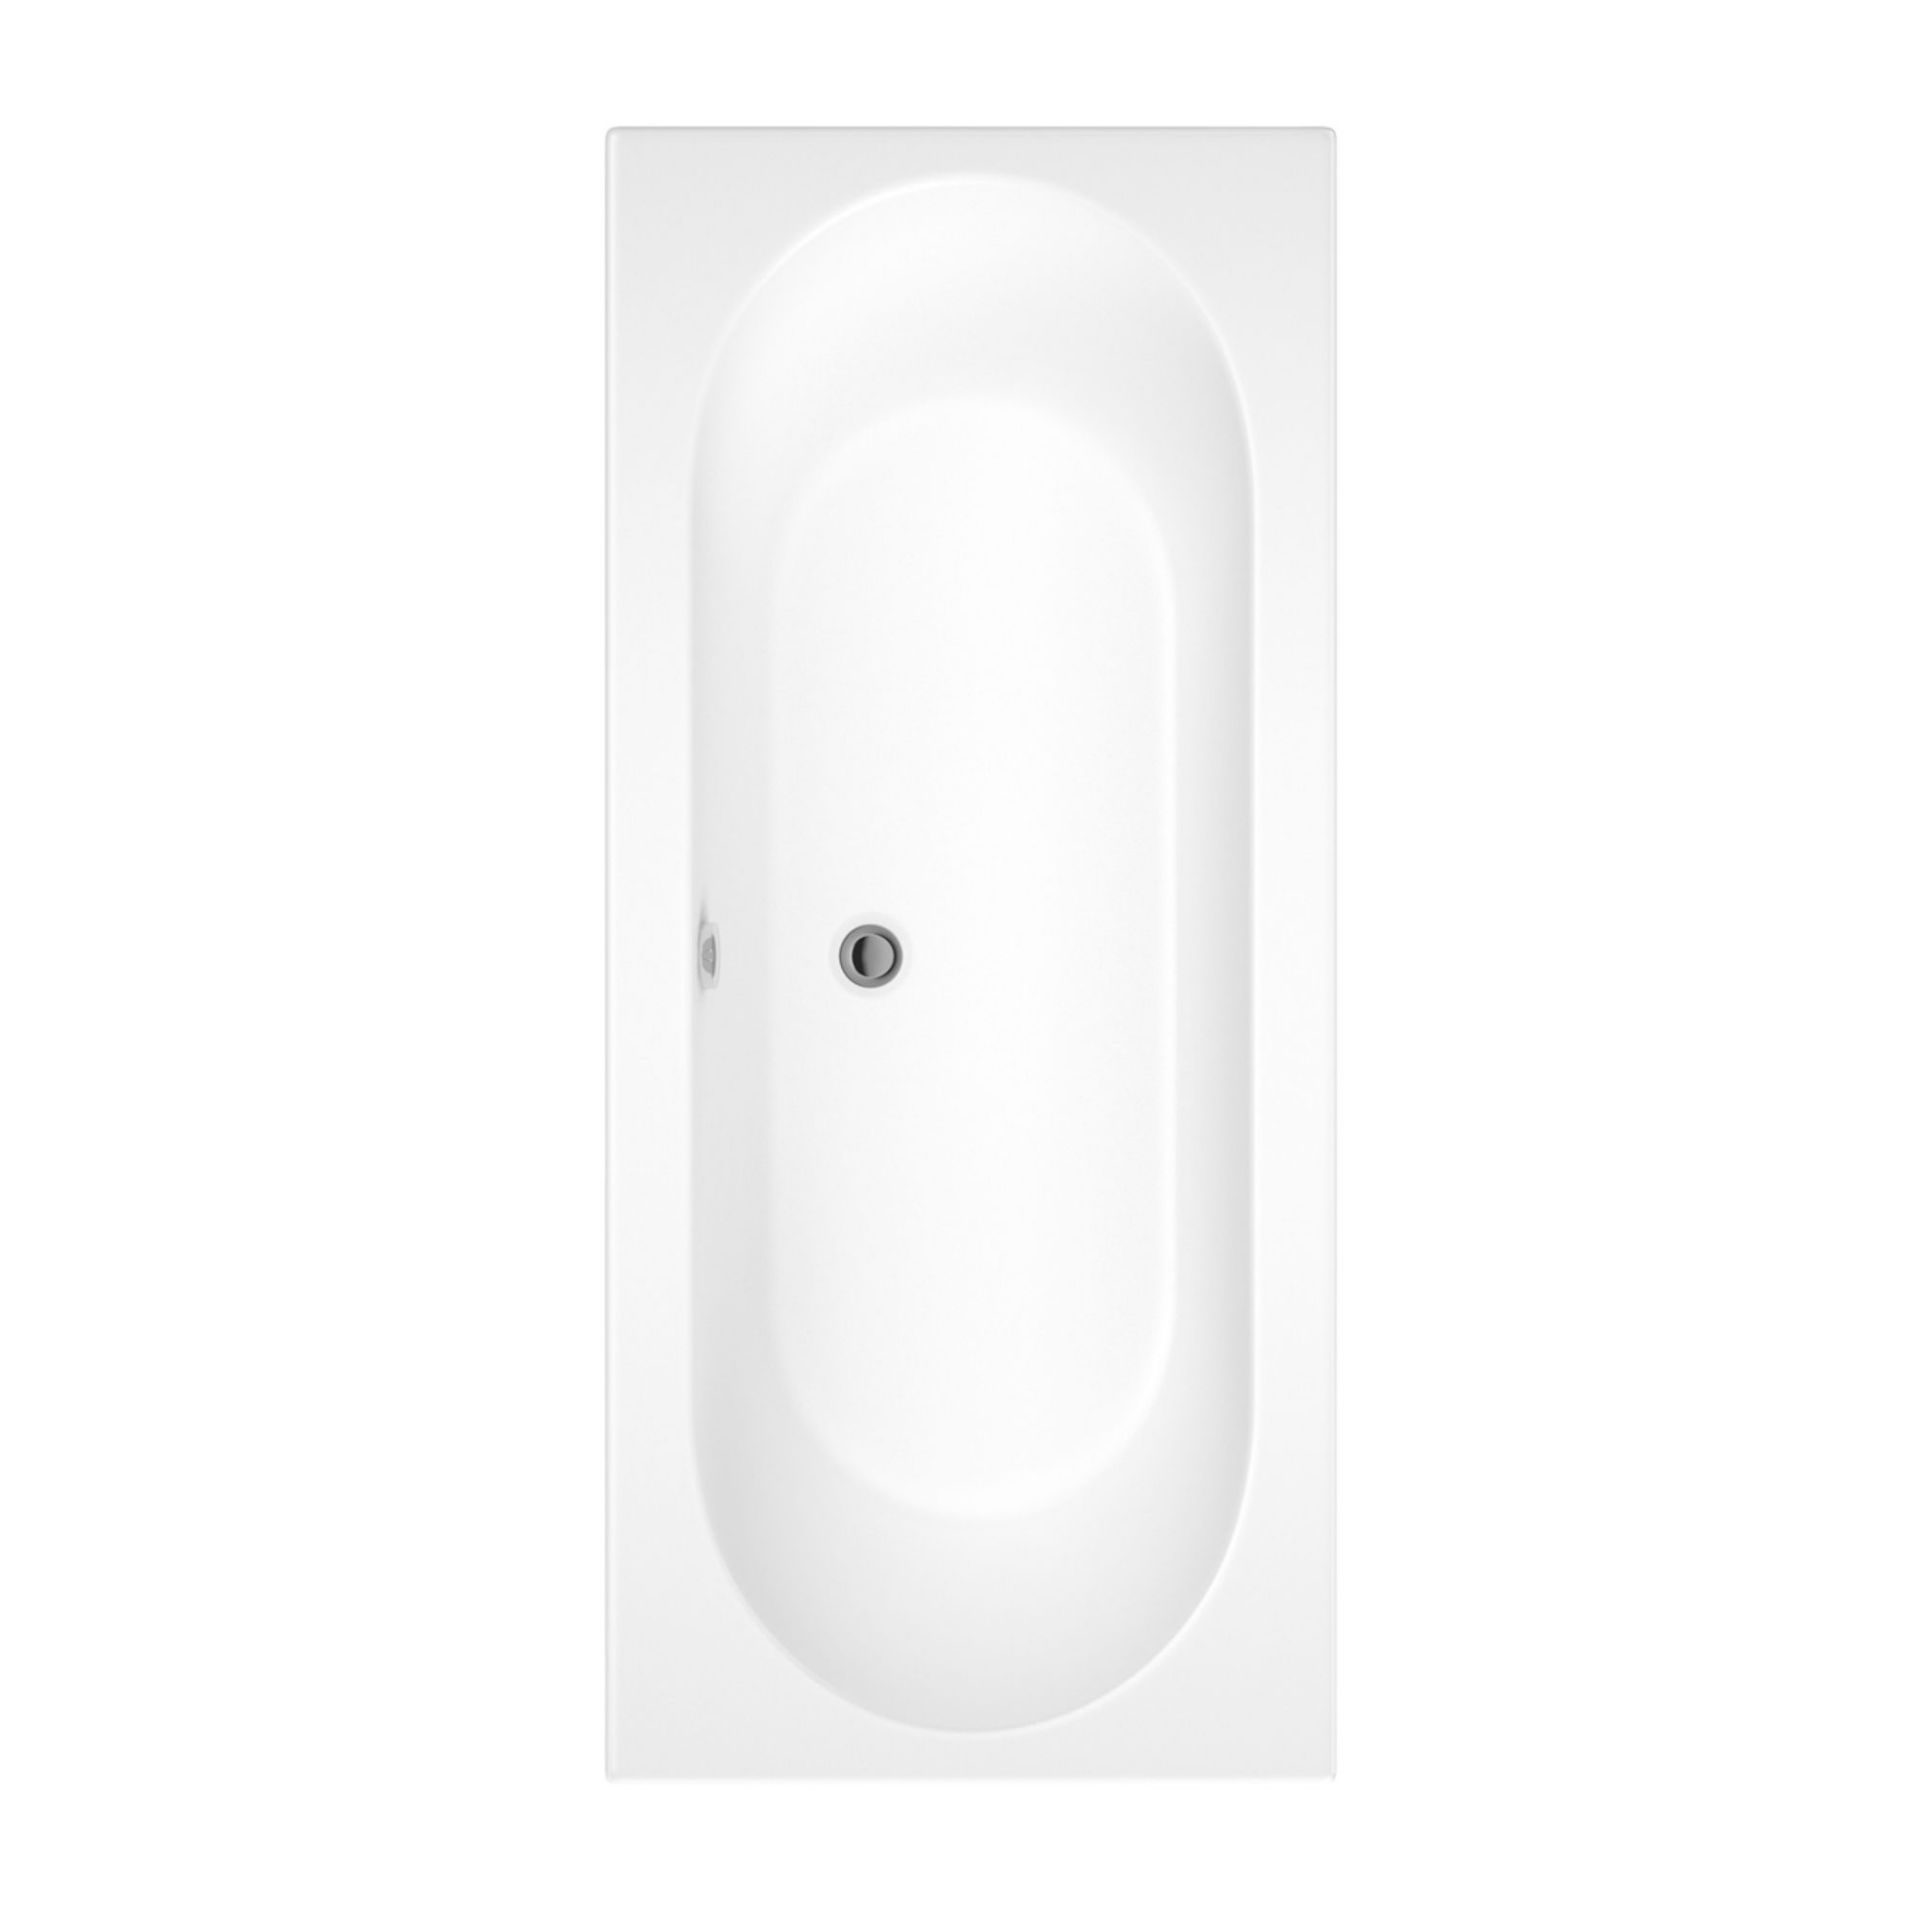 (CS10) 1700 x 750mm Round Double Ended Bath.COMES COMPLETE WITH SIDE PANEL. Manufactured in the UK - Image 2 of 3